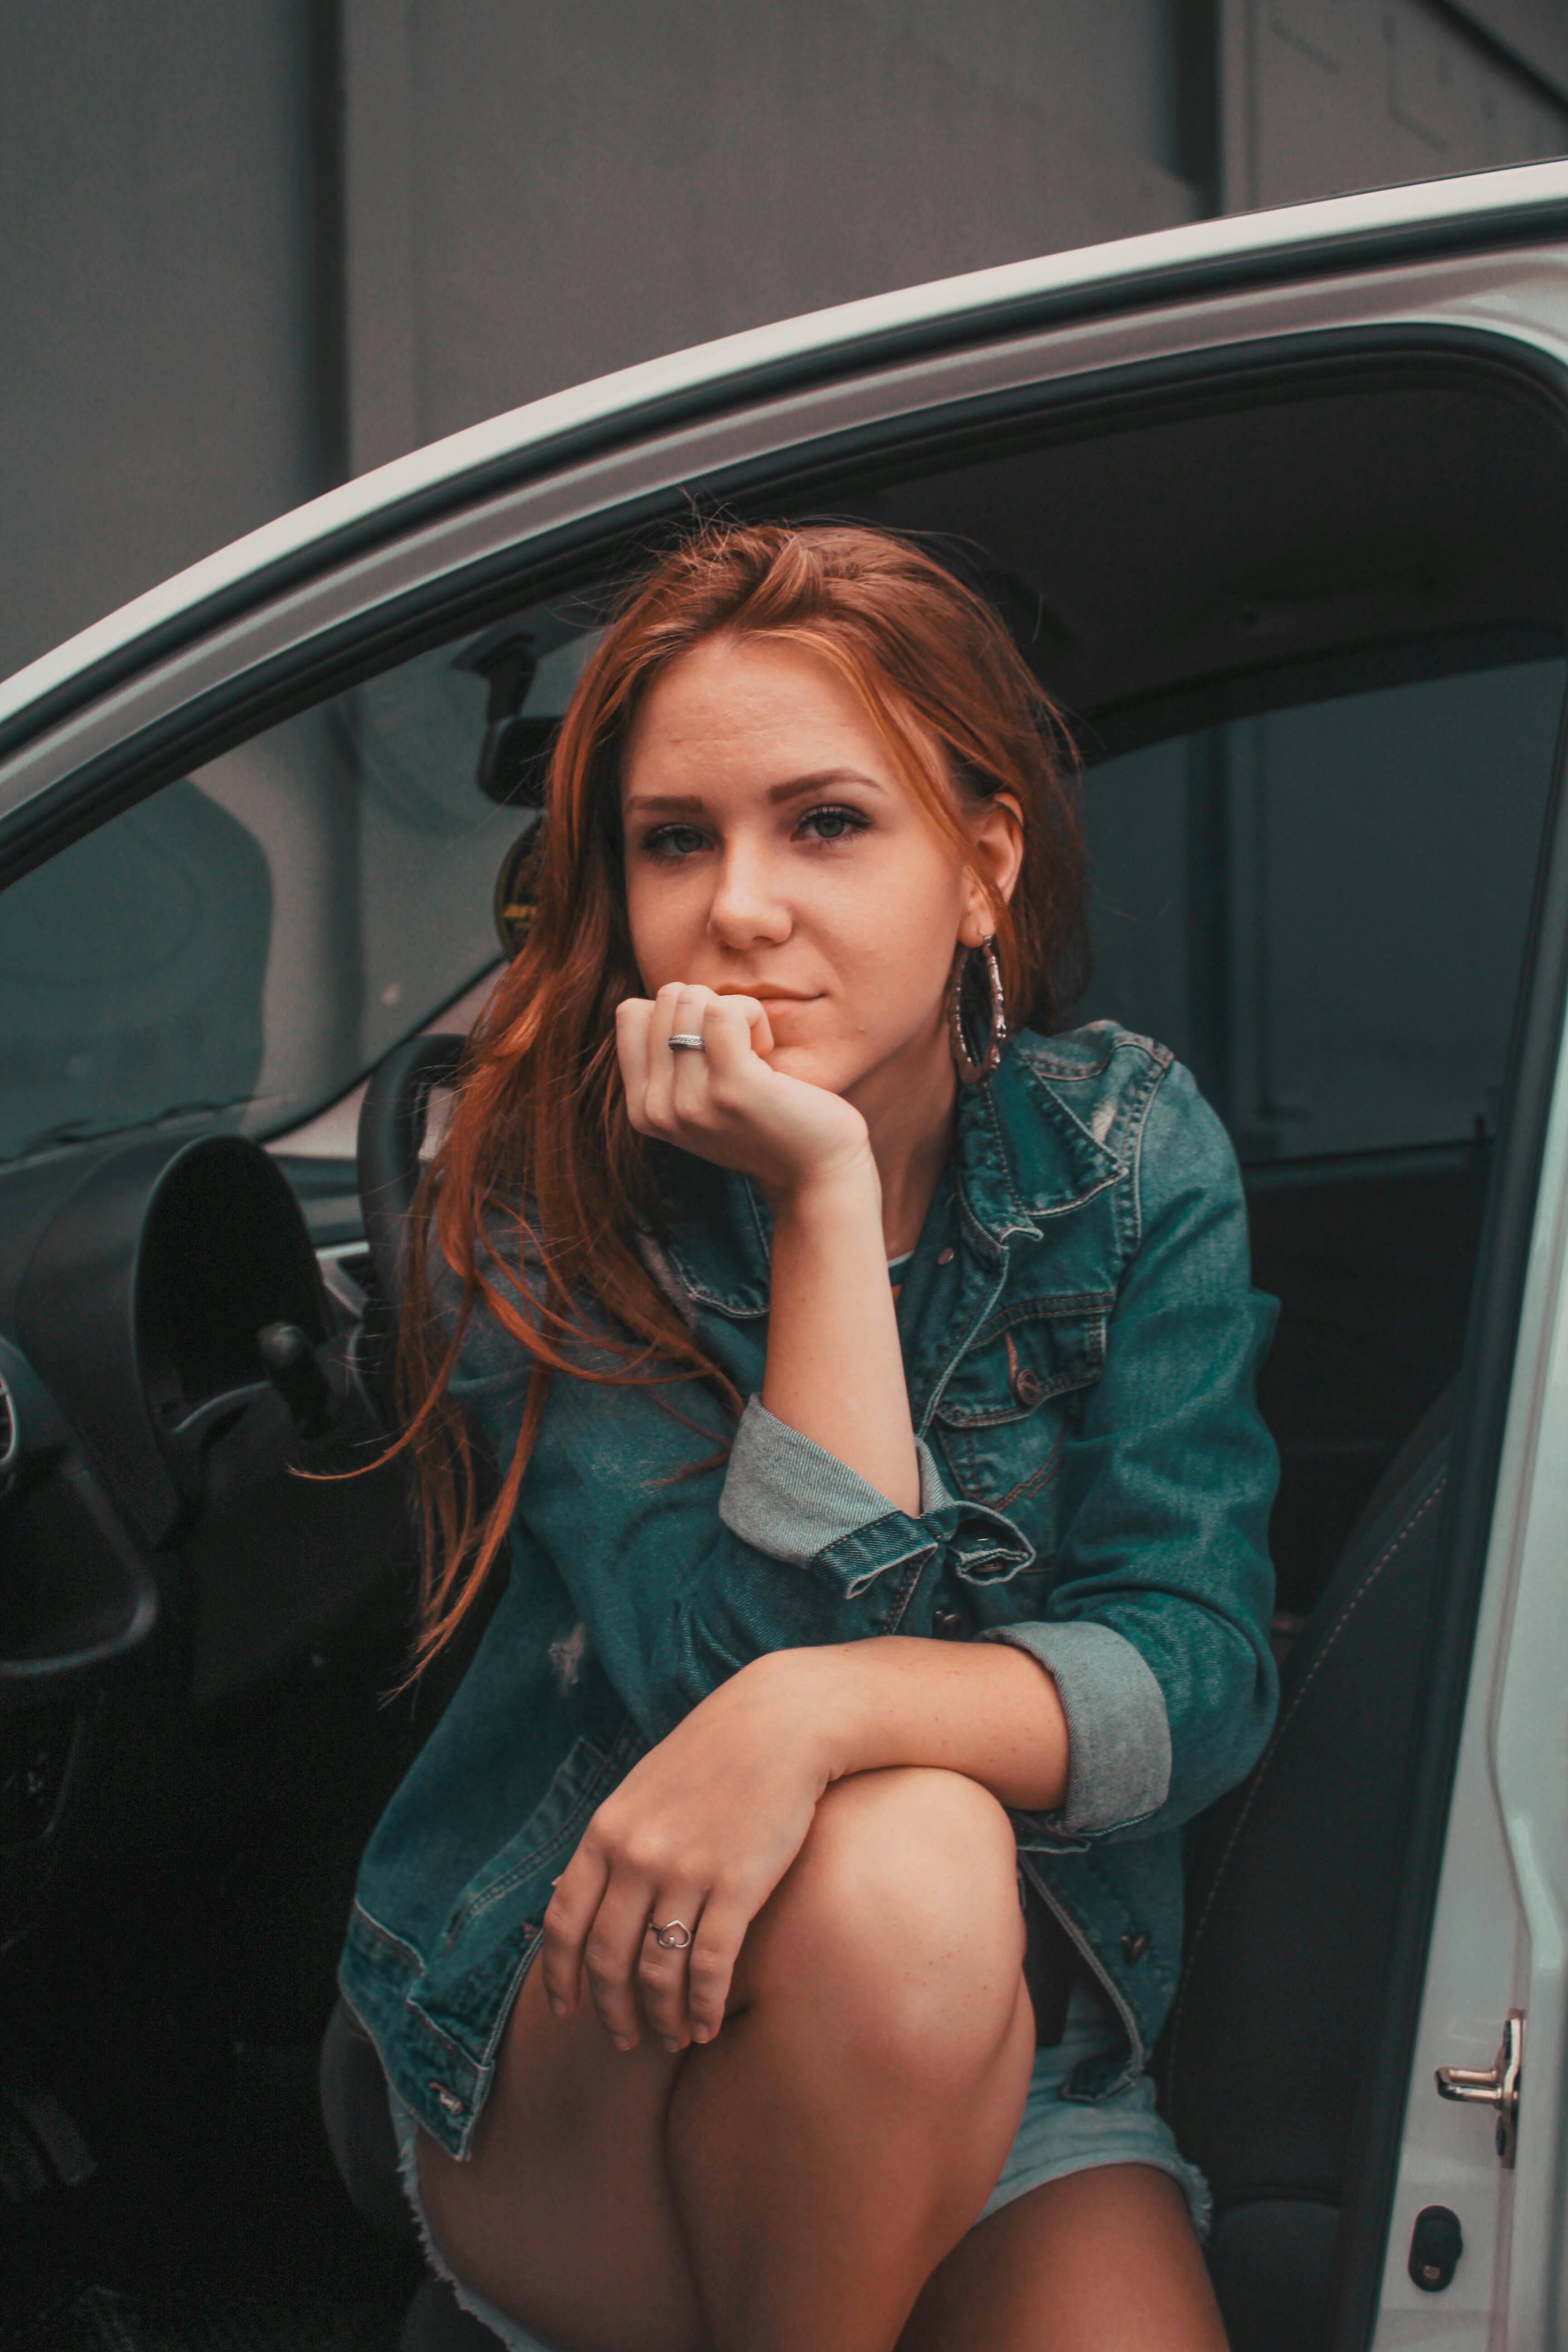 A woman sitting with her car's door open while contemplating something | Source: Pexels